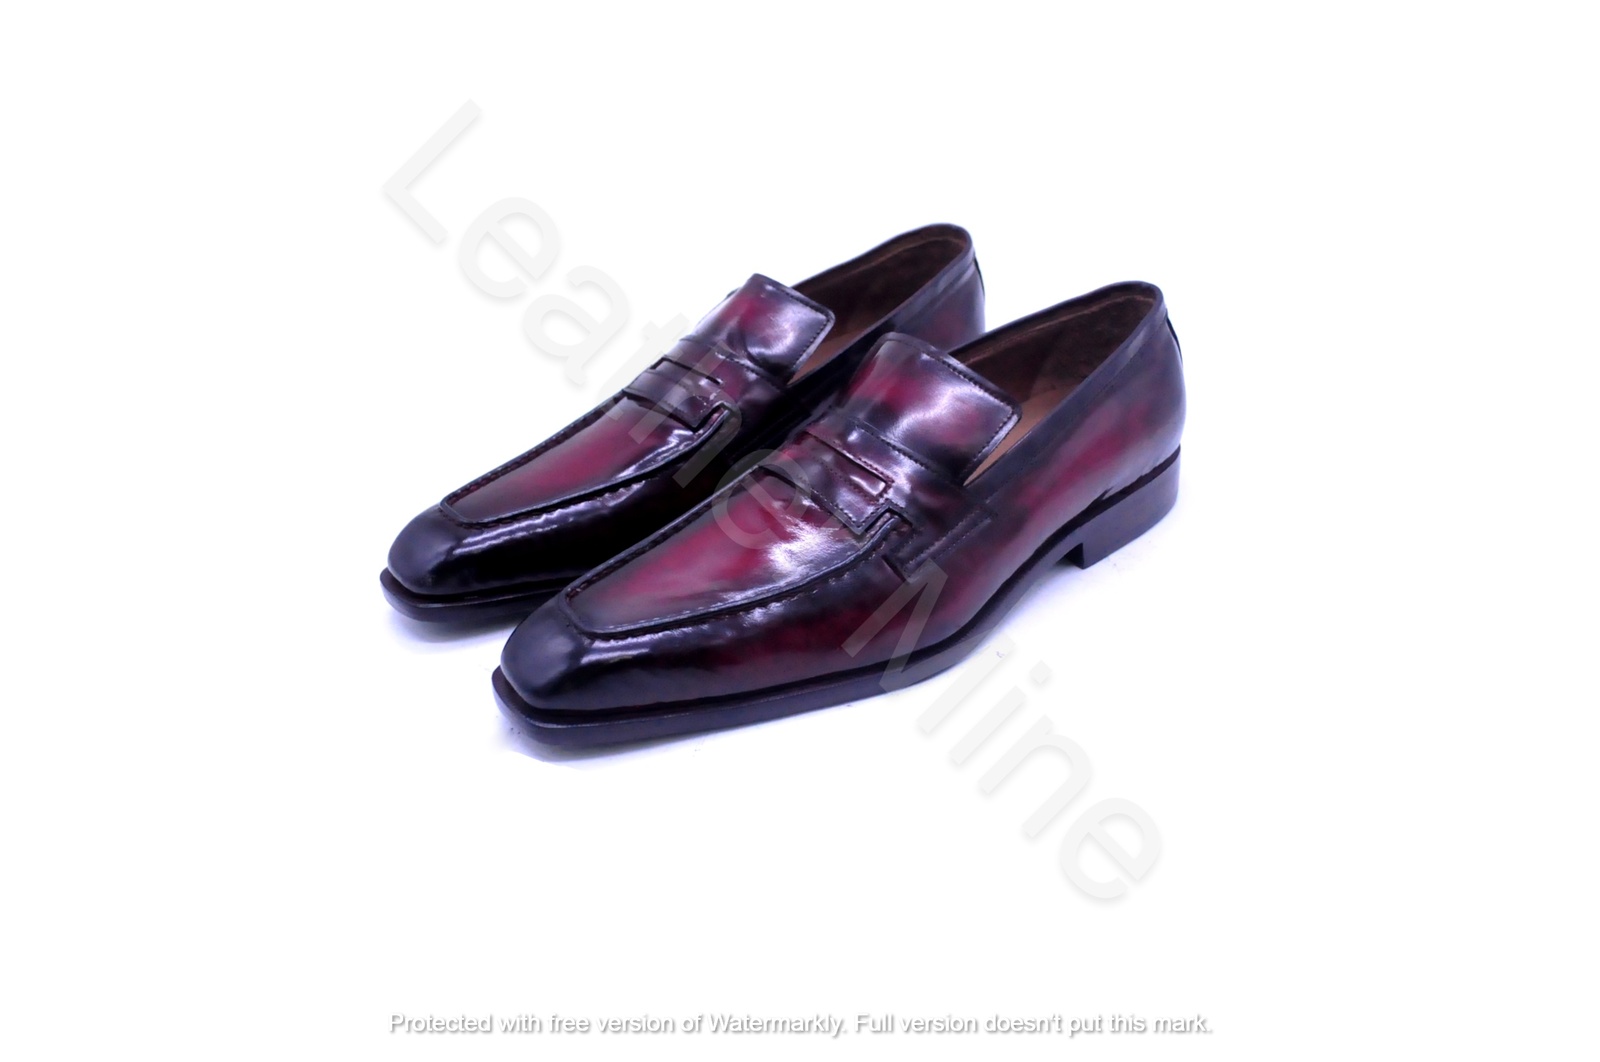 Men's Handmade Red Patent Leather Dress Shoes For Men, Custom Made Formal Shoes